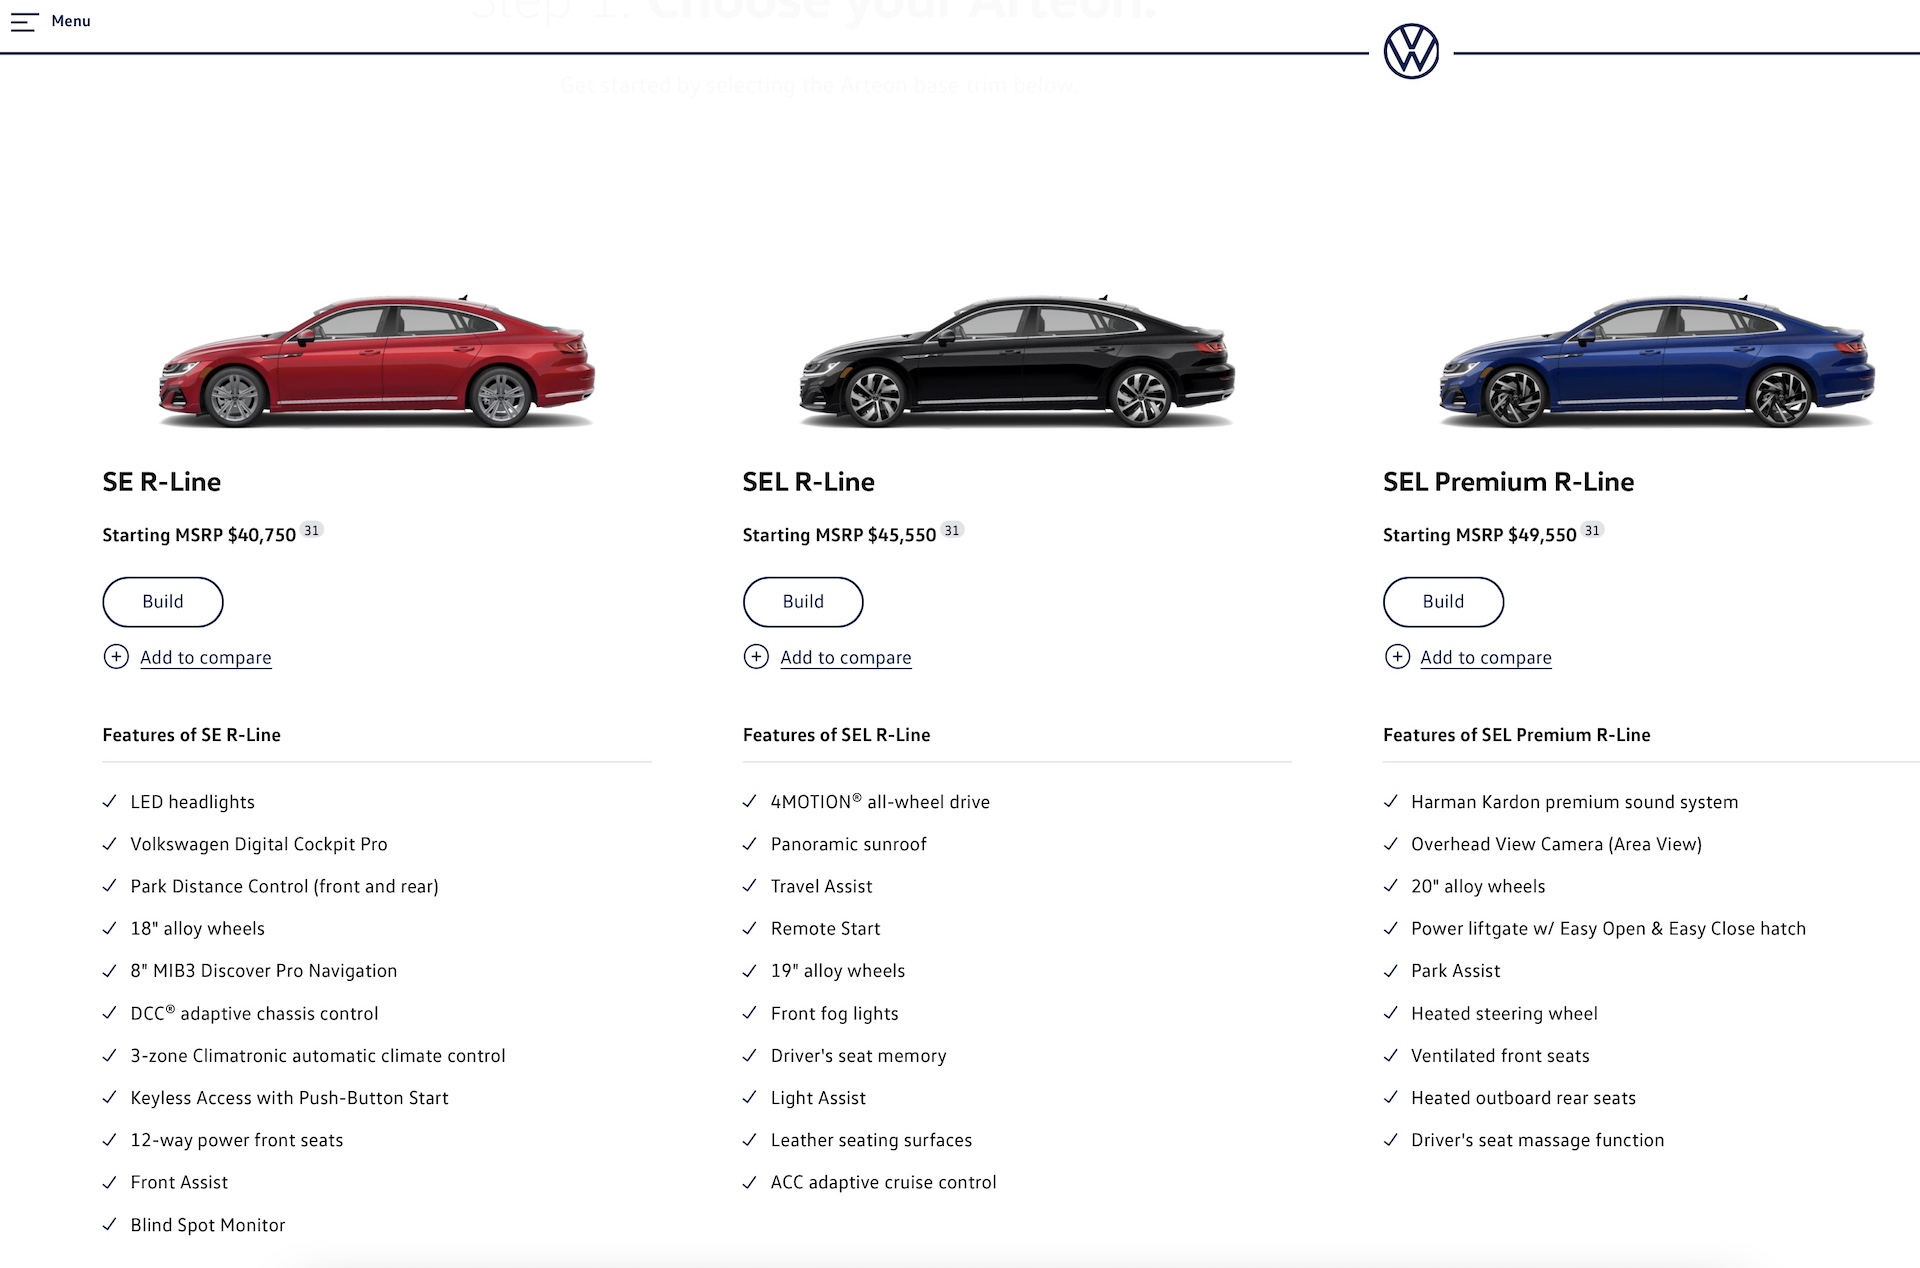 Who would have thought that browsing carmakers' websites would be so difficult?